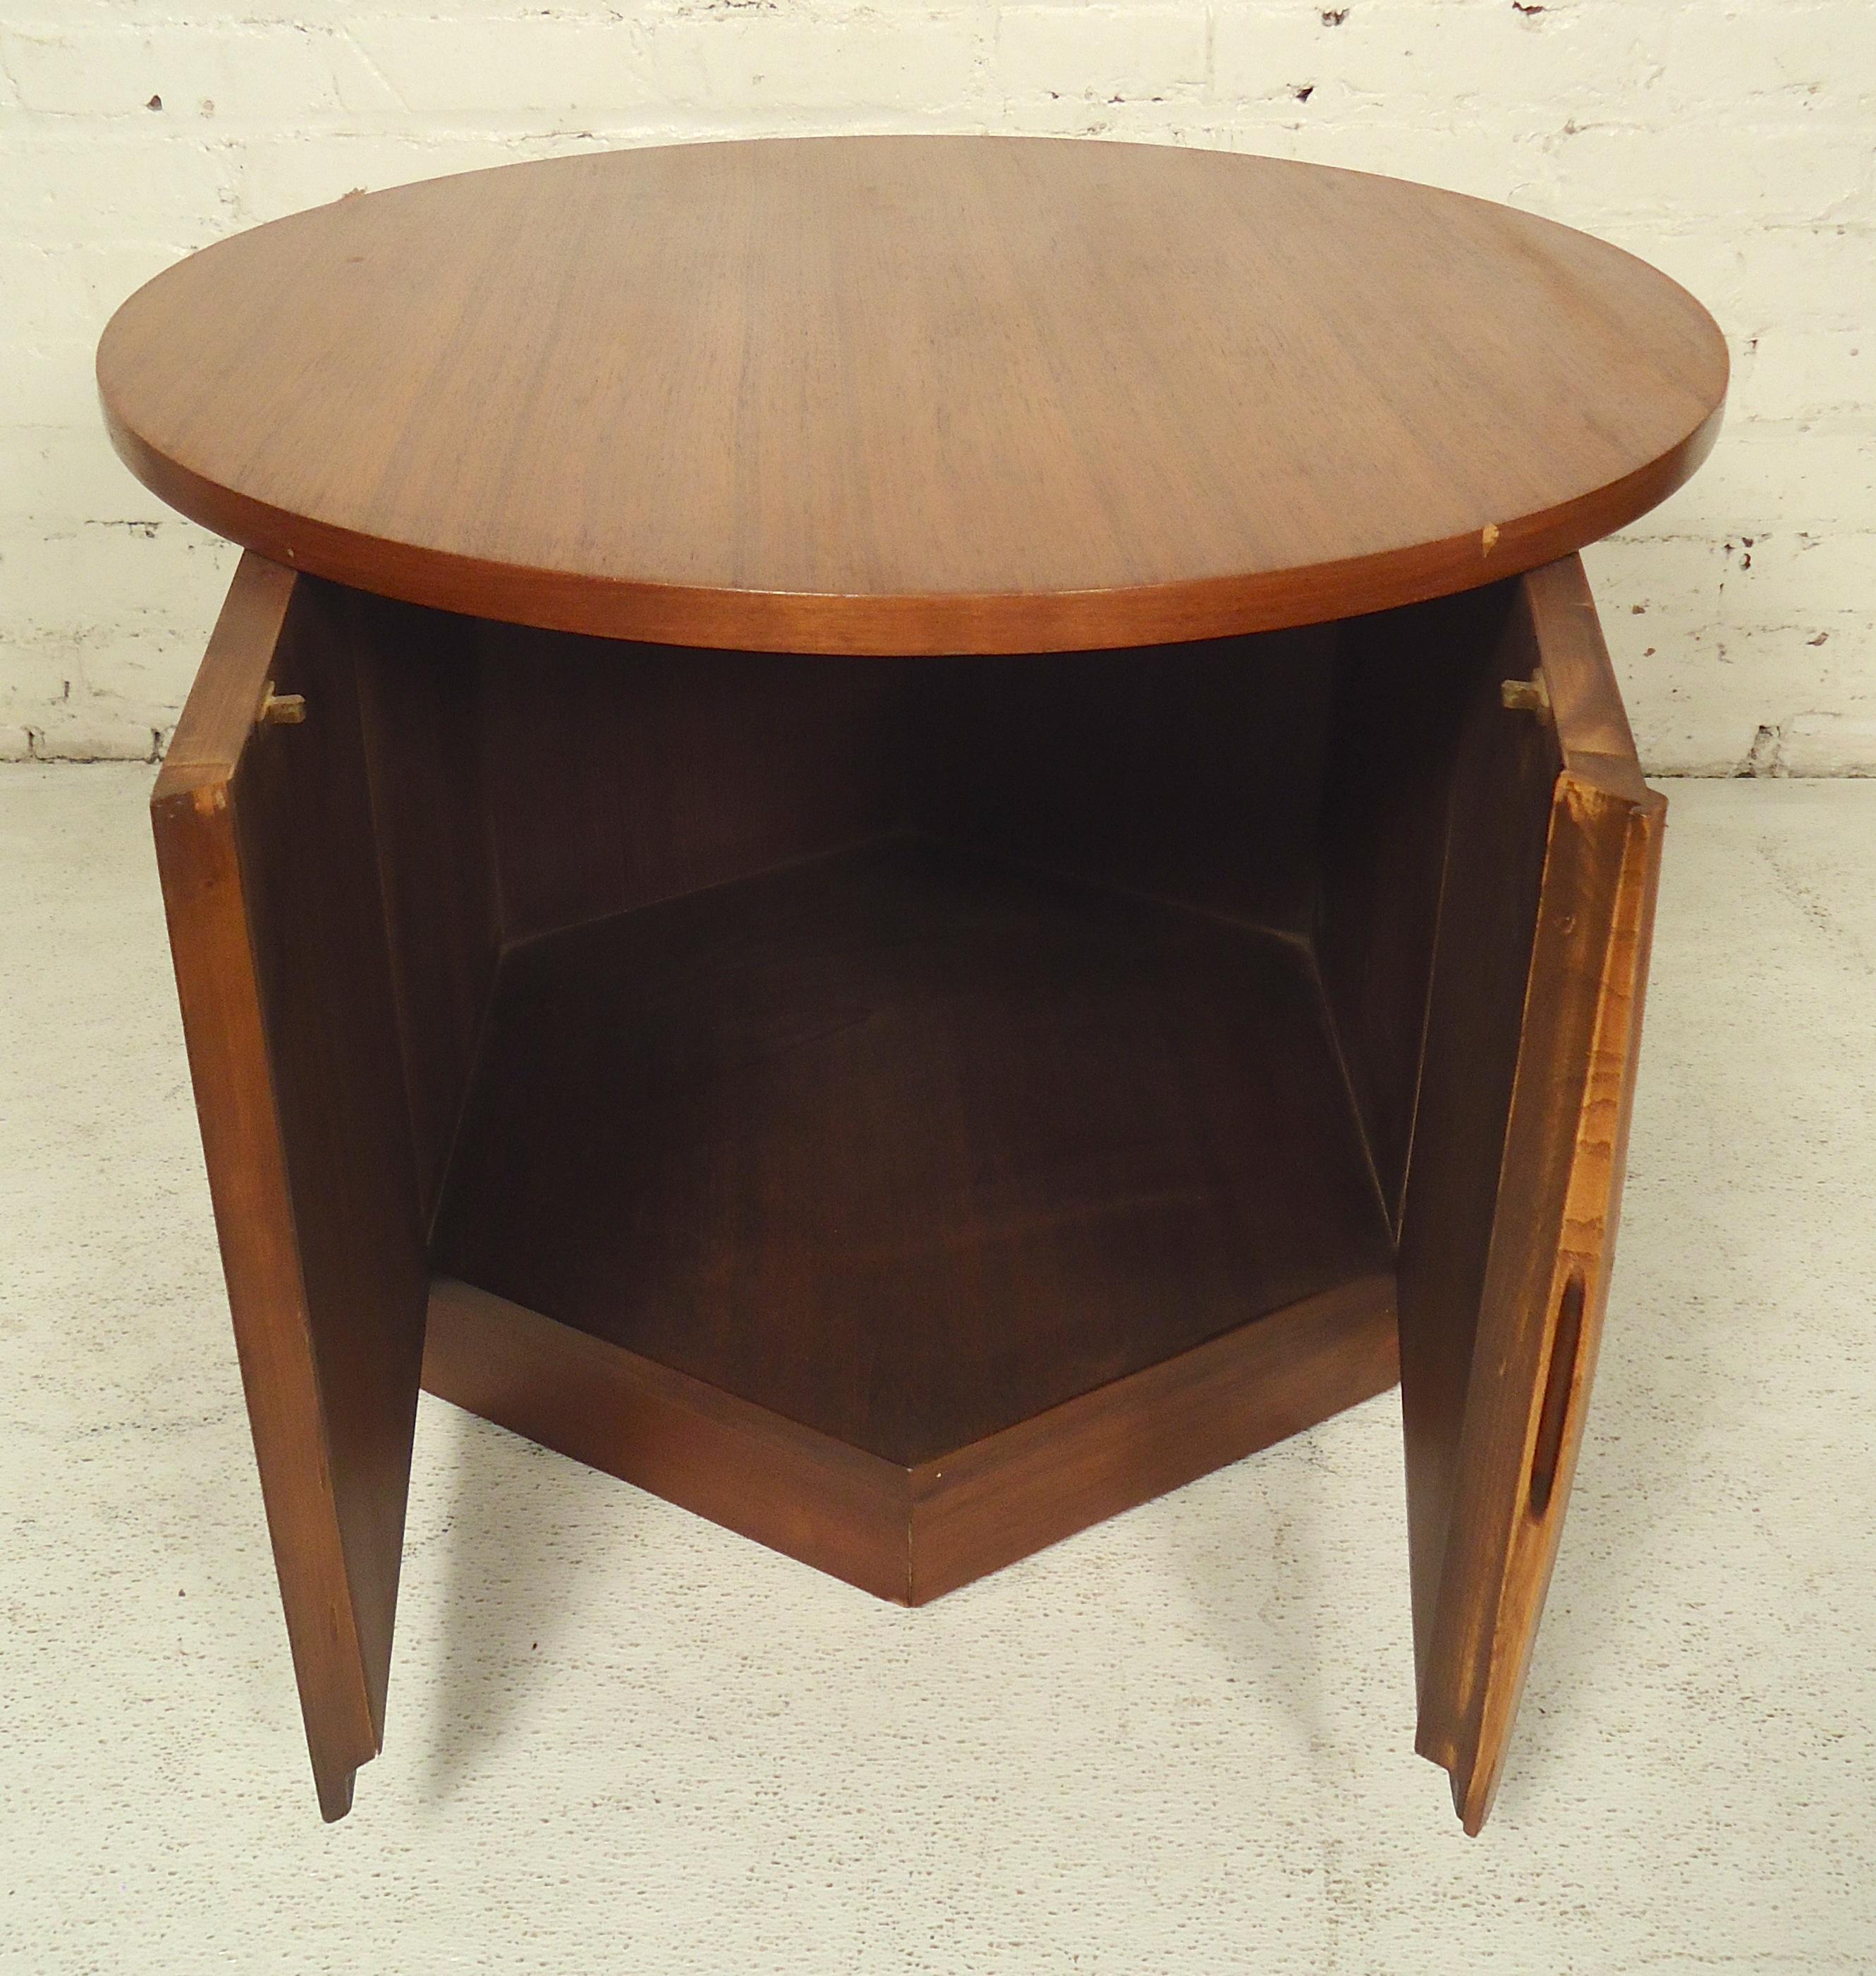 Vintage modern walnut table with storage compartment. Use as a sofa side table or nightstand.

(Please confirm item location - NY or NJ - with dealer).
   